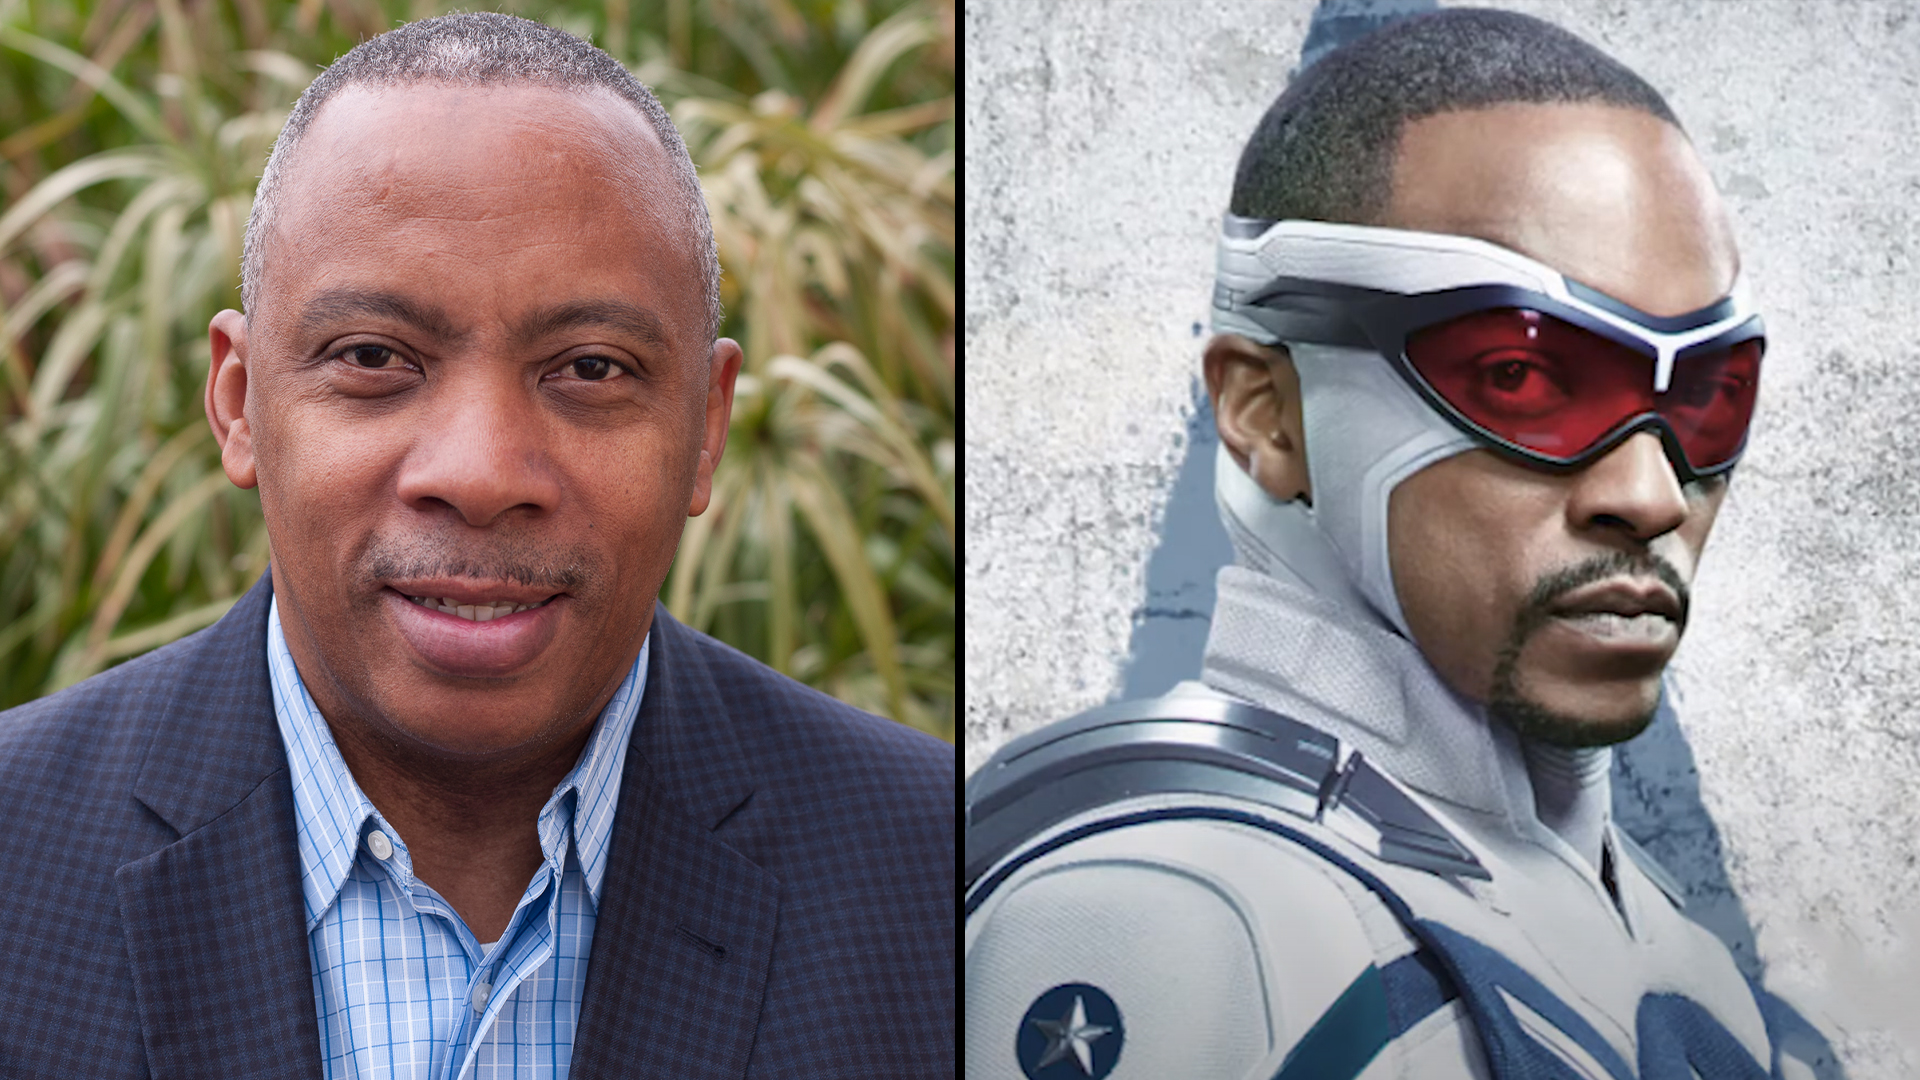 Family Affair: How Dr. Mackie & His Brother, The First Black Captain America, Are Engaging Black Kids In STEM